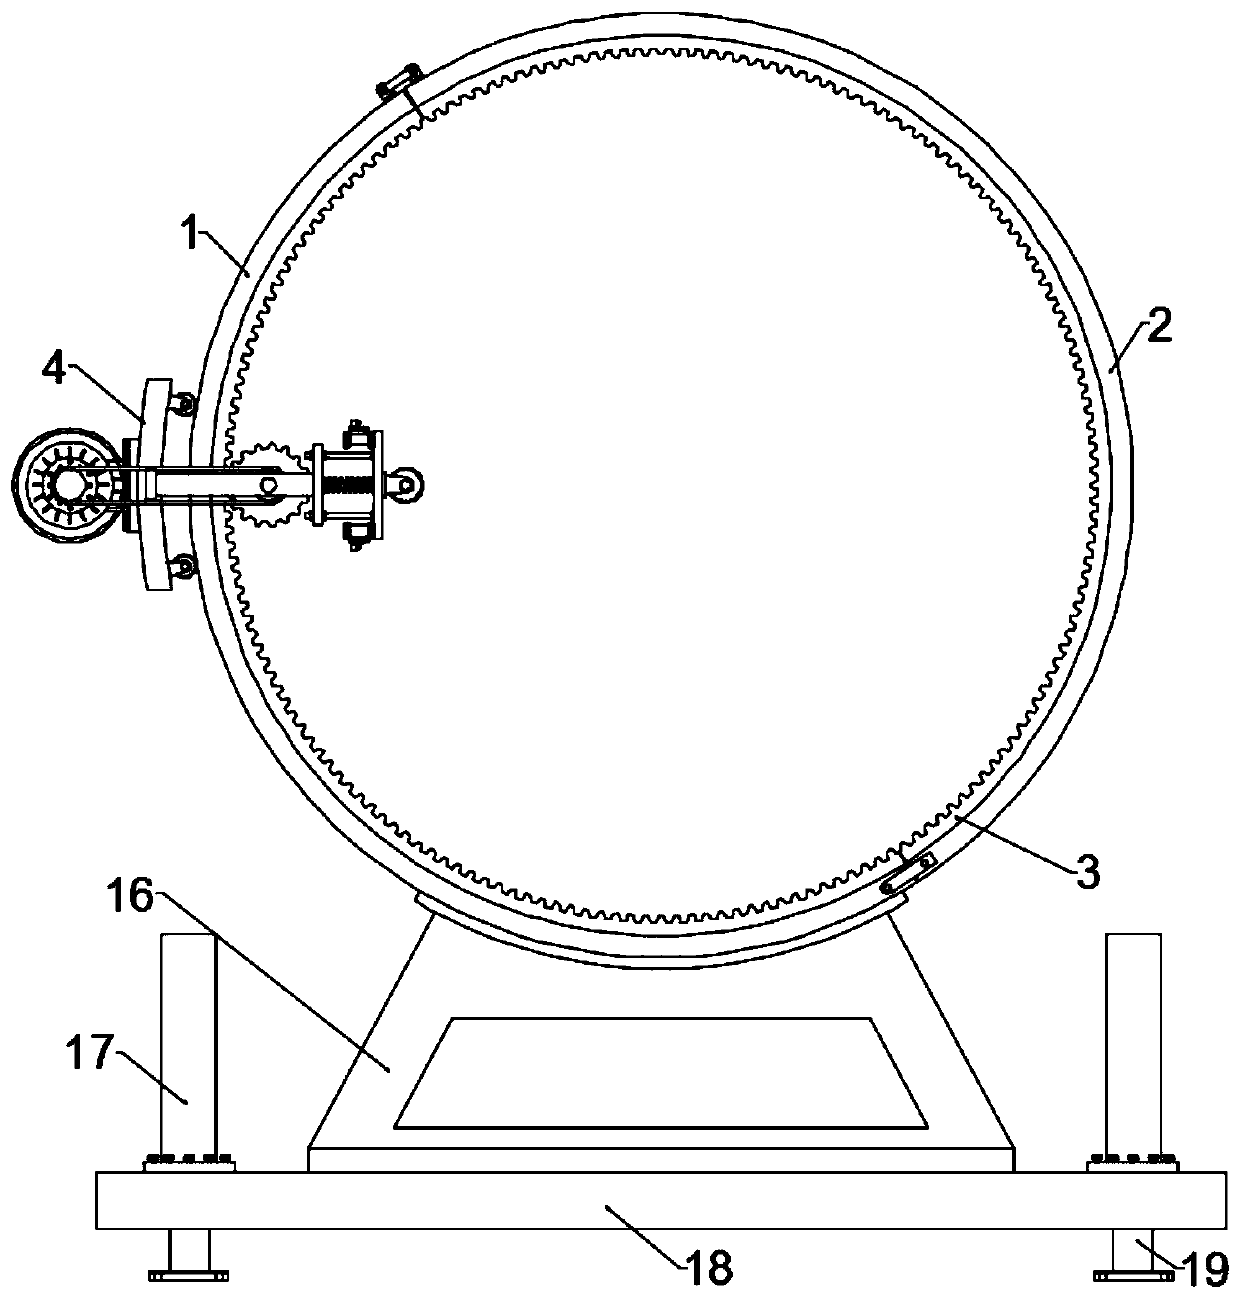 Pipeline circumferential ultrasonic flaw detection device